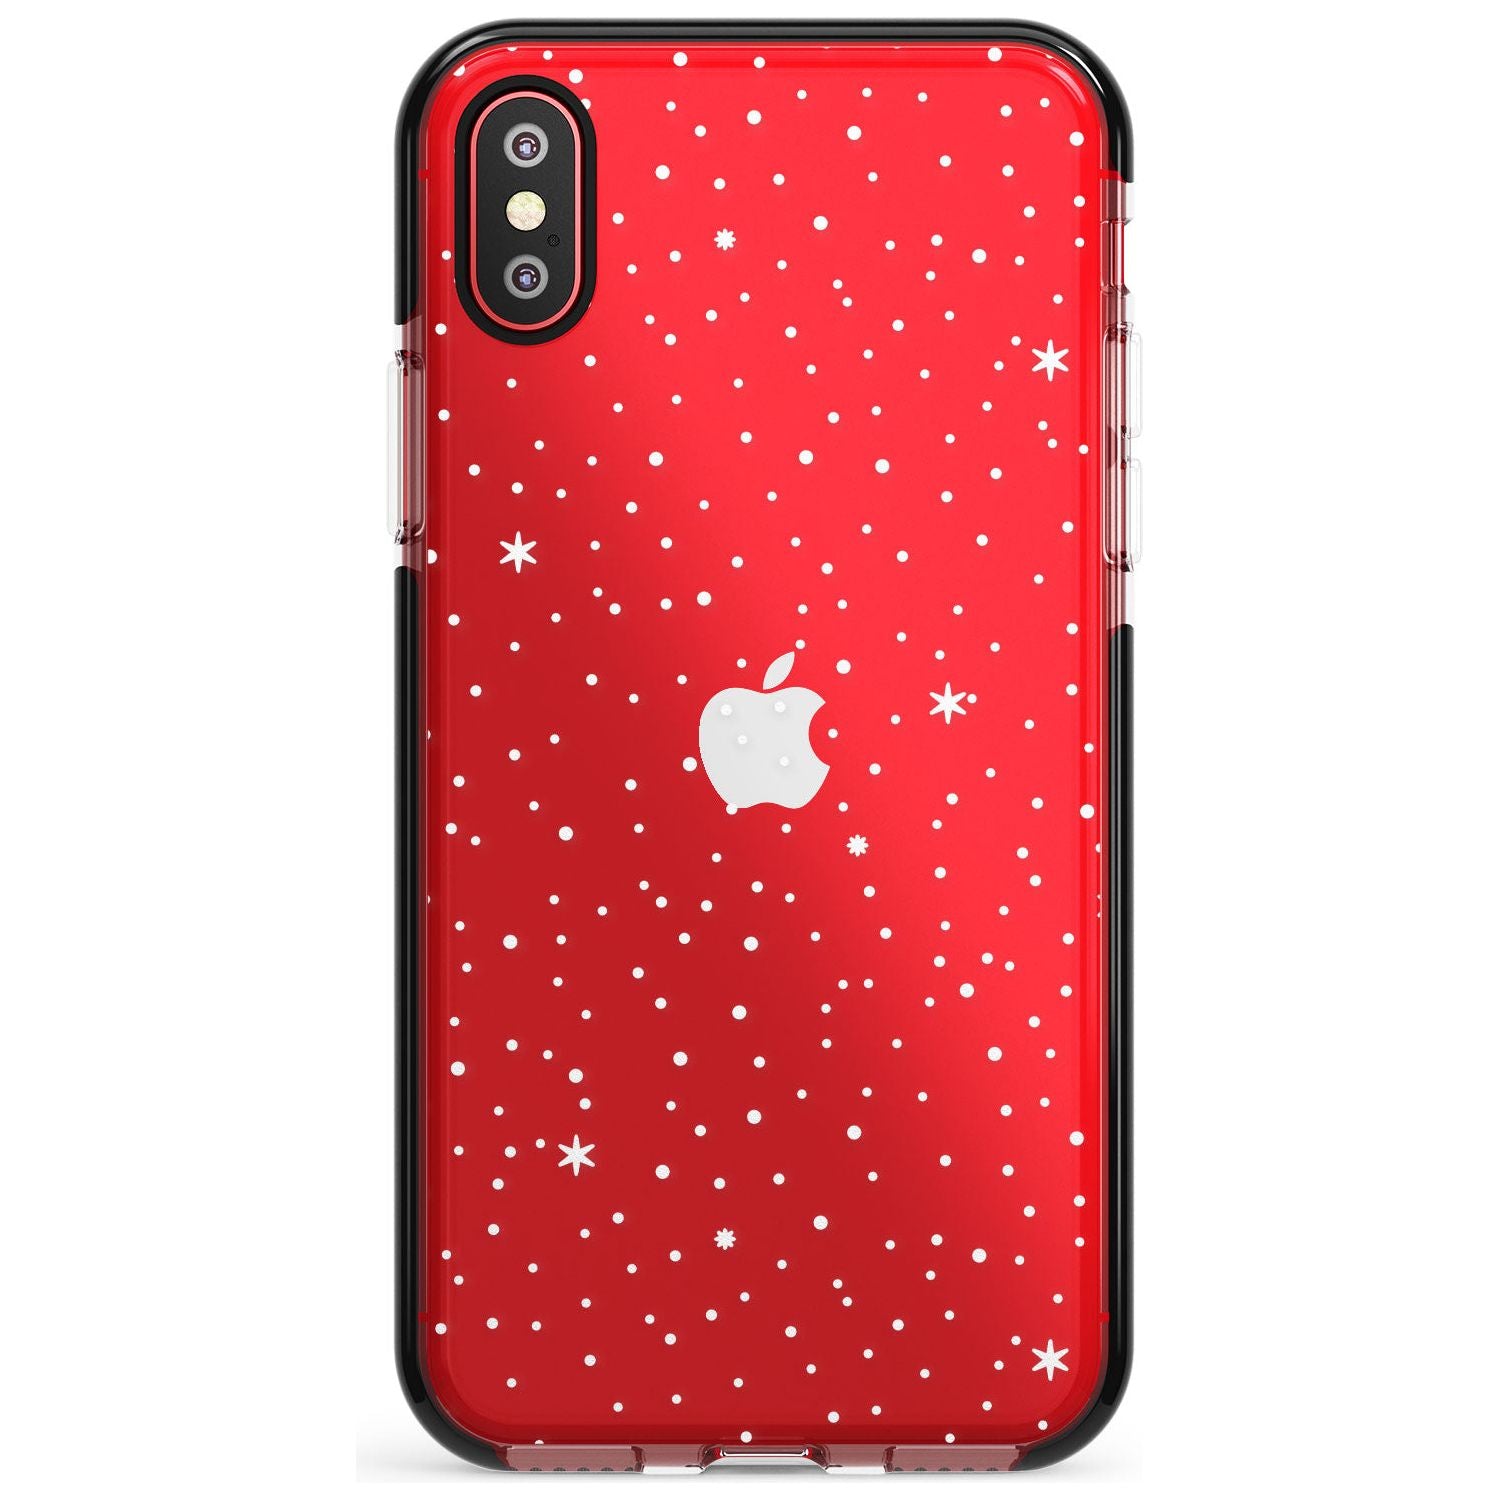 Celestial Starry Sky White Pink Fade Impact Phone Case for iPhone X XS Max XR